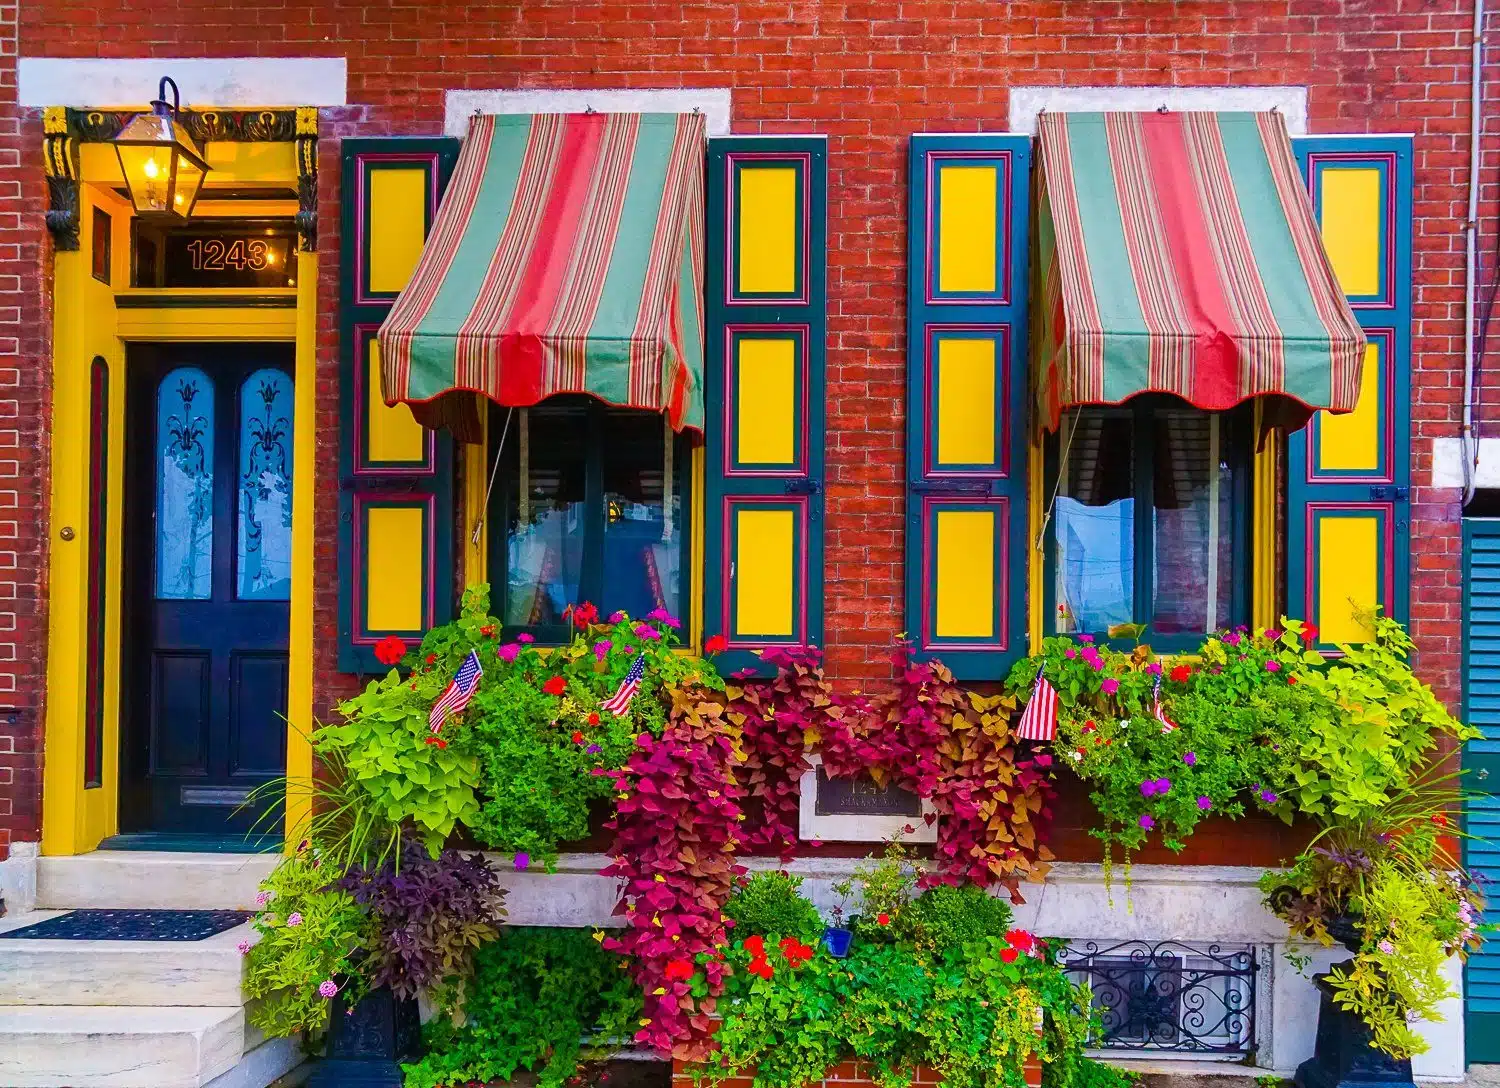 This Fishtown building isn't fishy, but it sure is flowery!